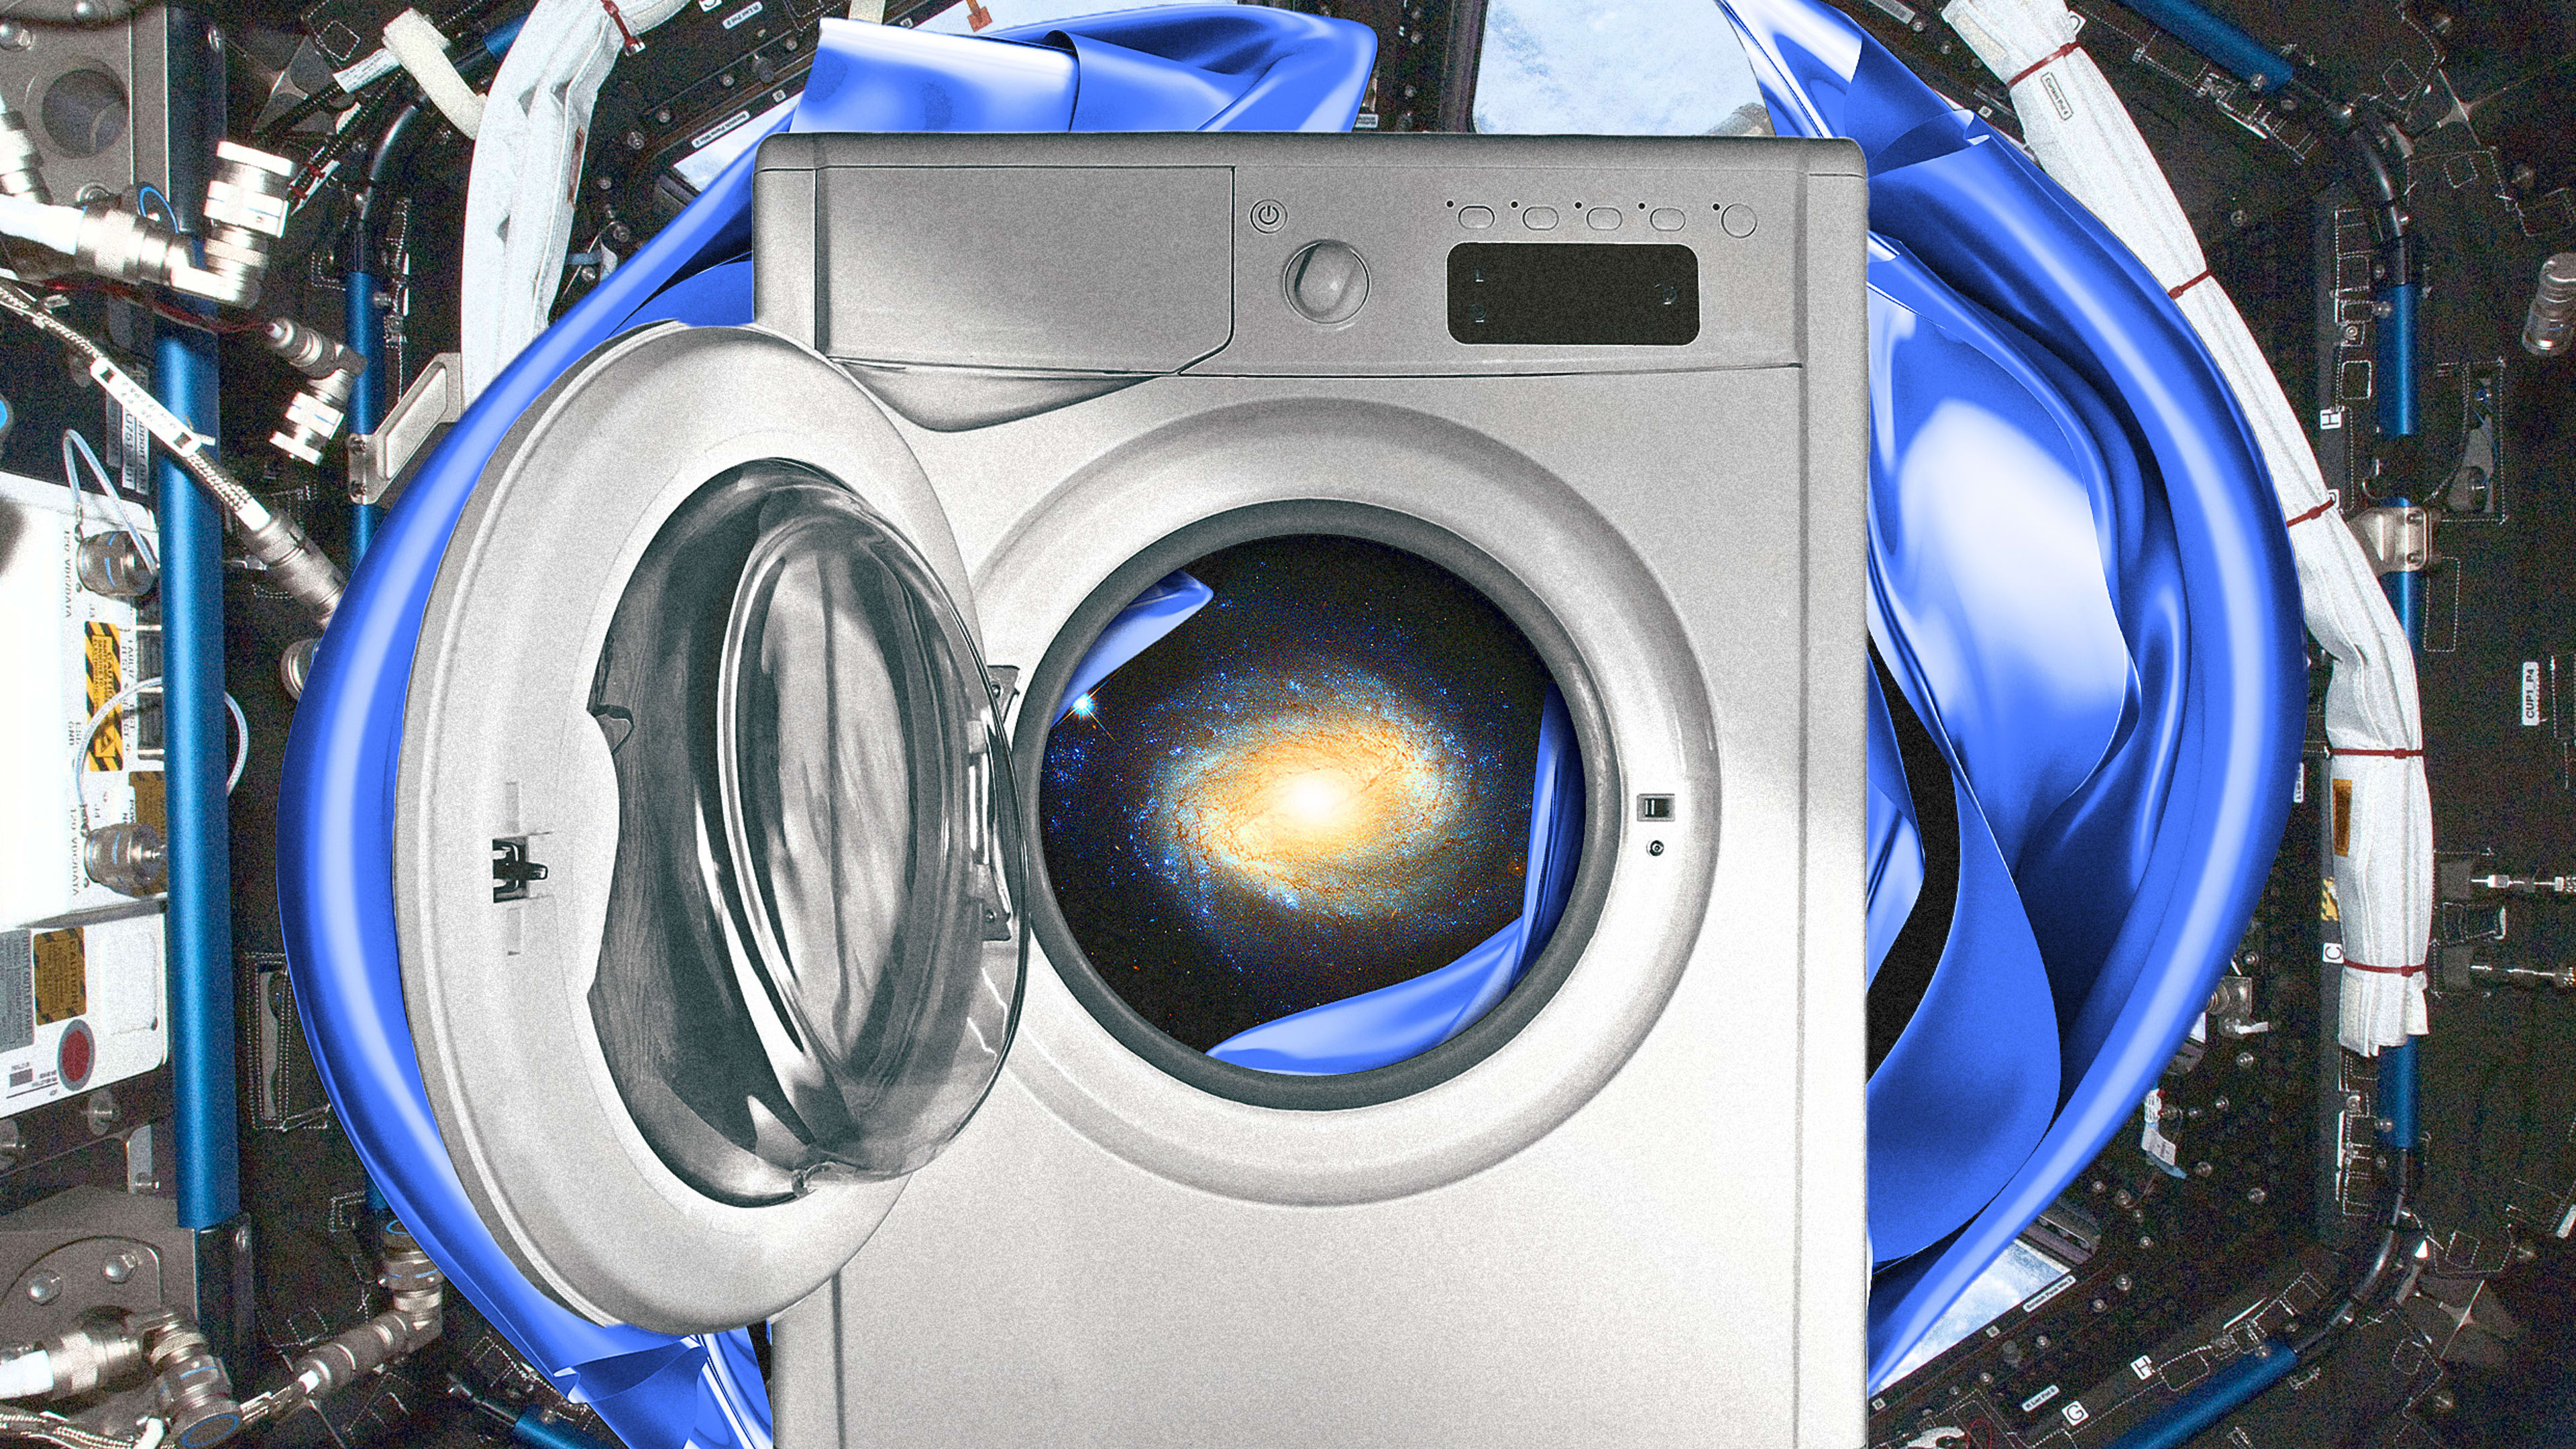 ‘NASA Tide’ will be the first-ever laundry detergent for astronauts